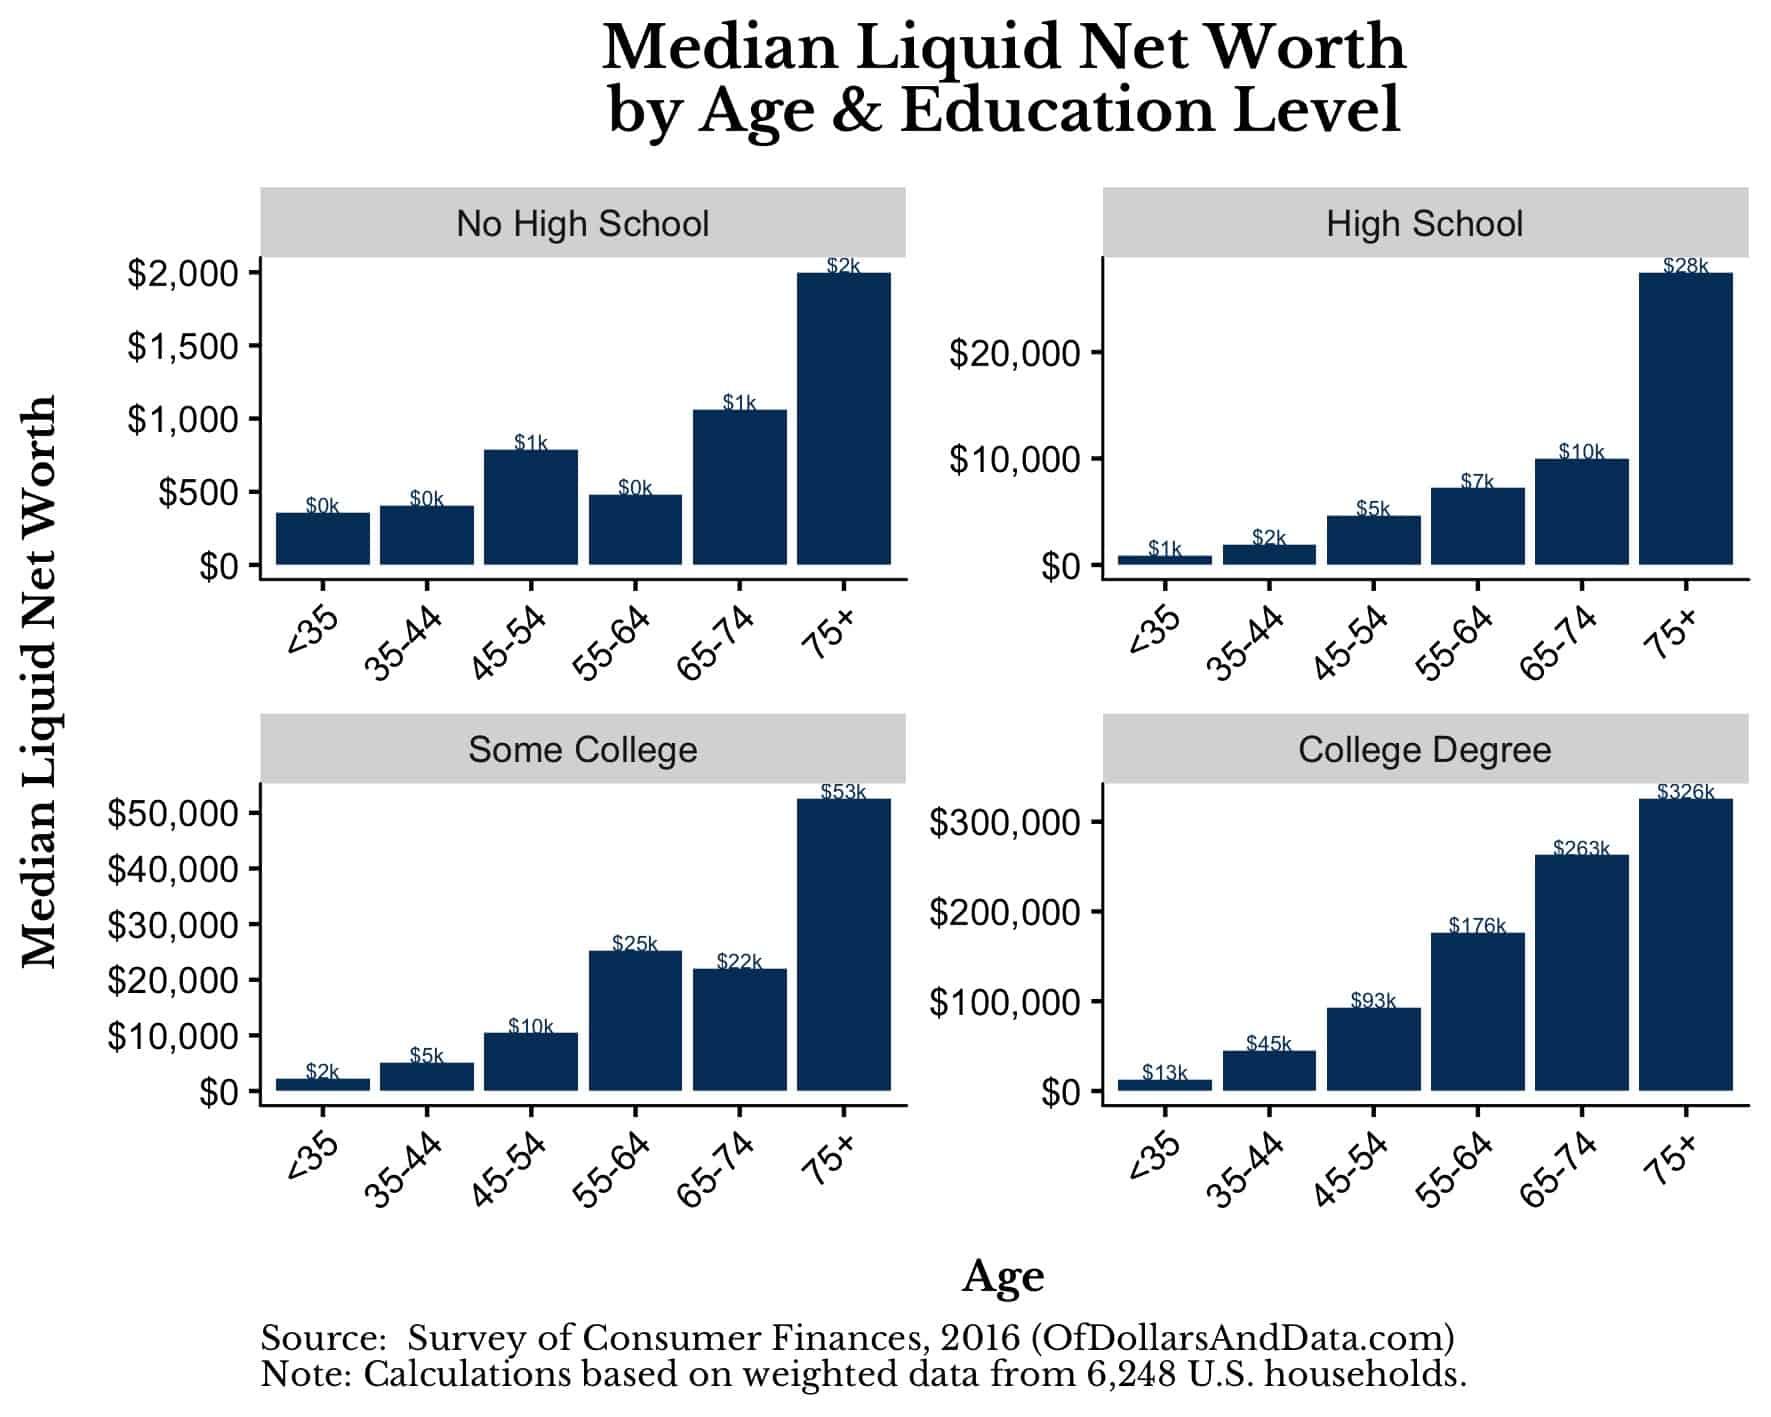 Median liquid net worth by age and education level, 2016 Survey of Consumer Finances